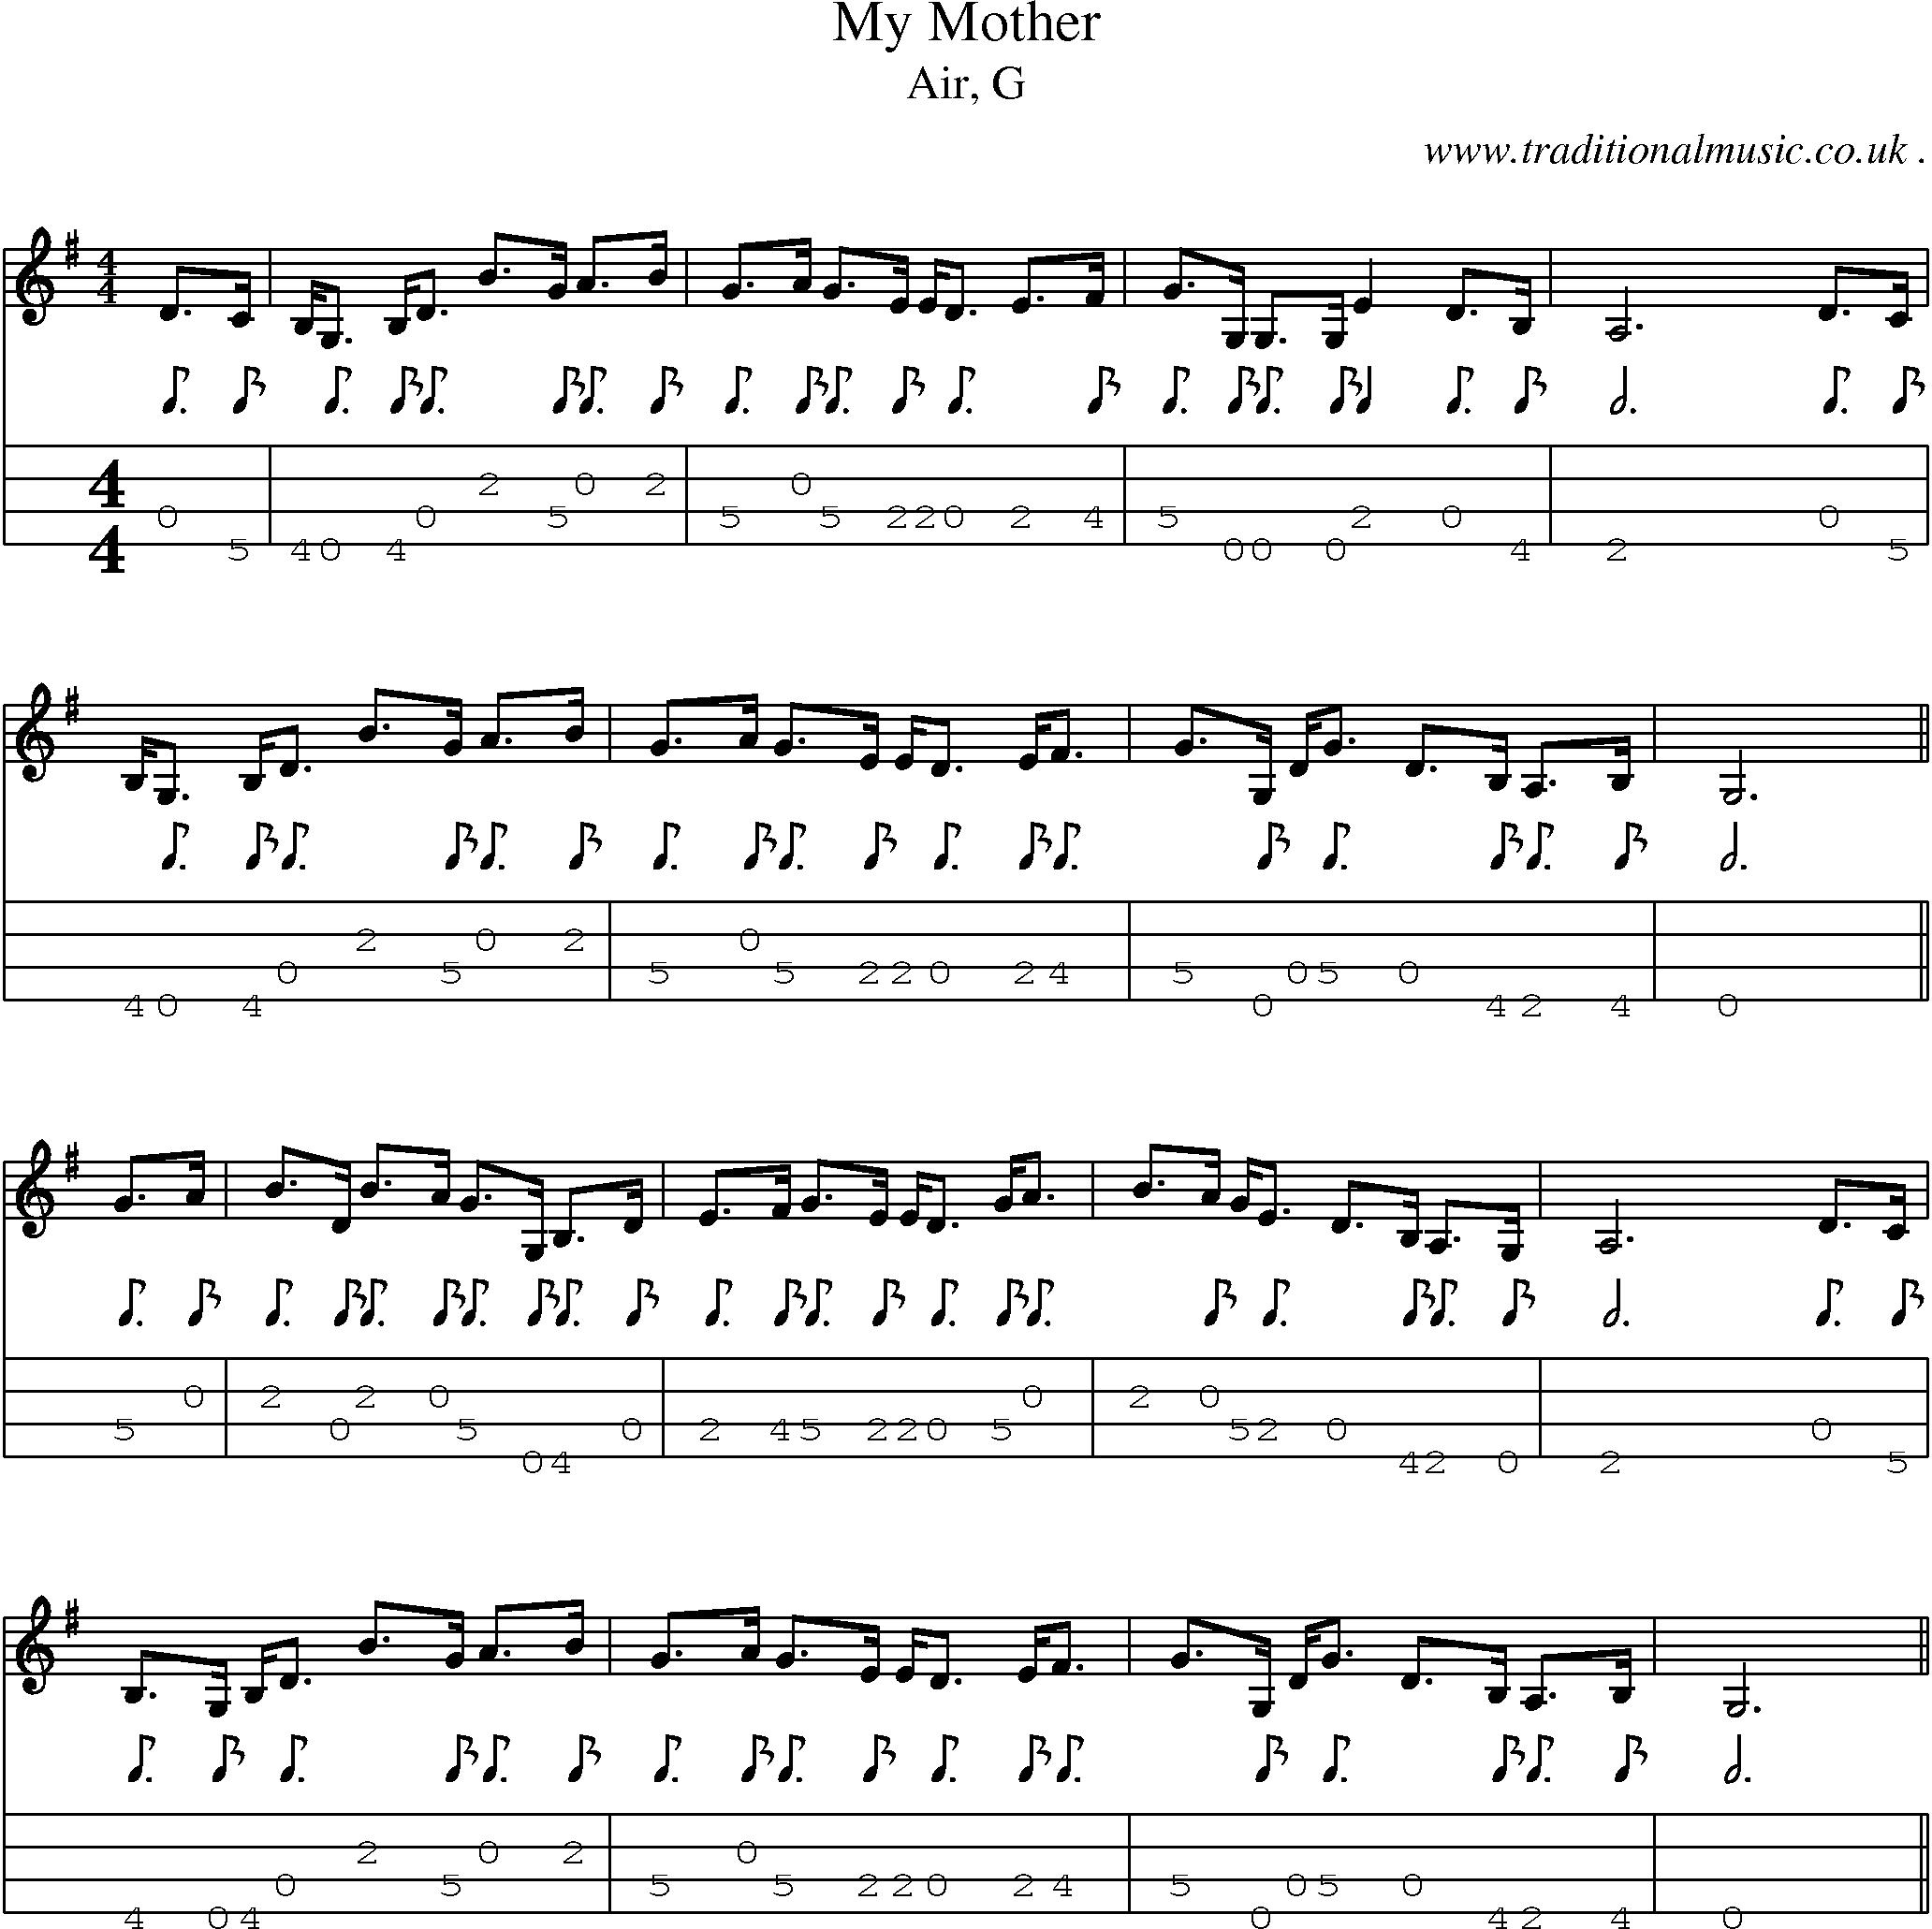 Sheet-music  score, Chords and Mandolin Tabs for My Mother